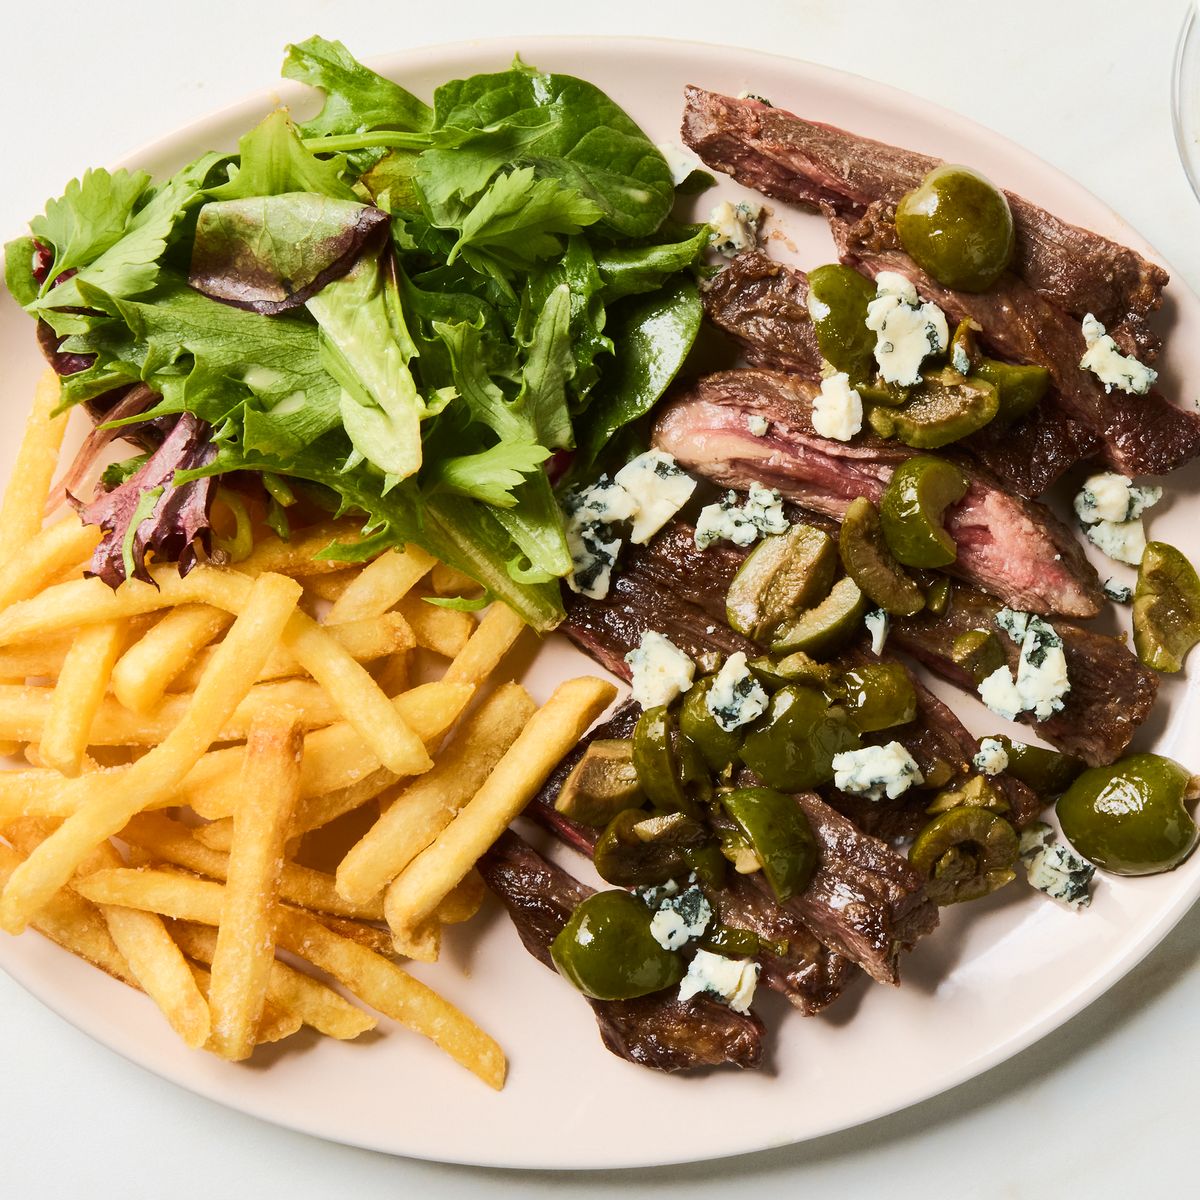 make dirty martini steak frites your go-to date night meal